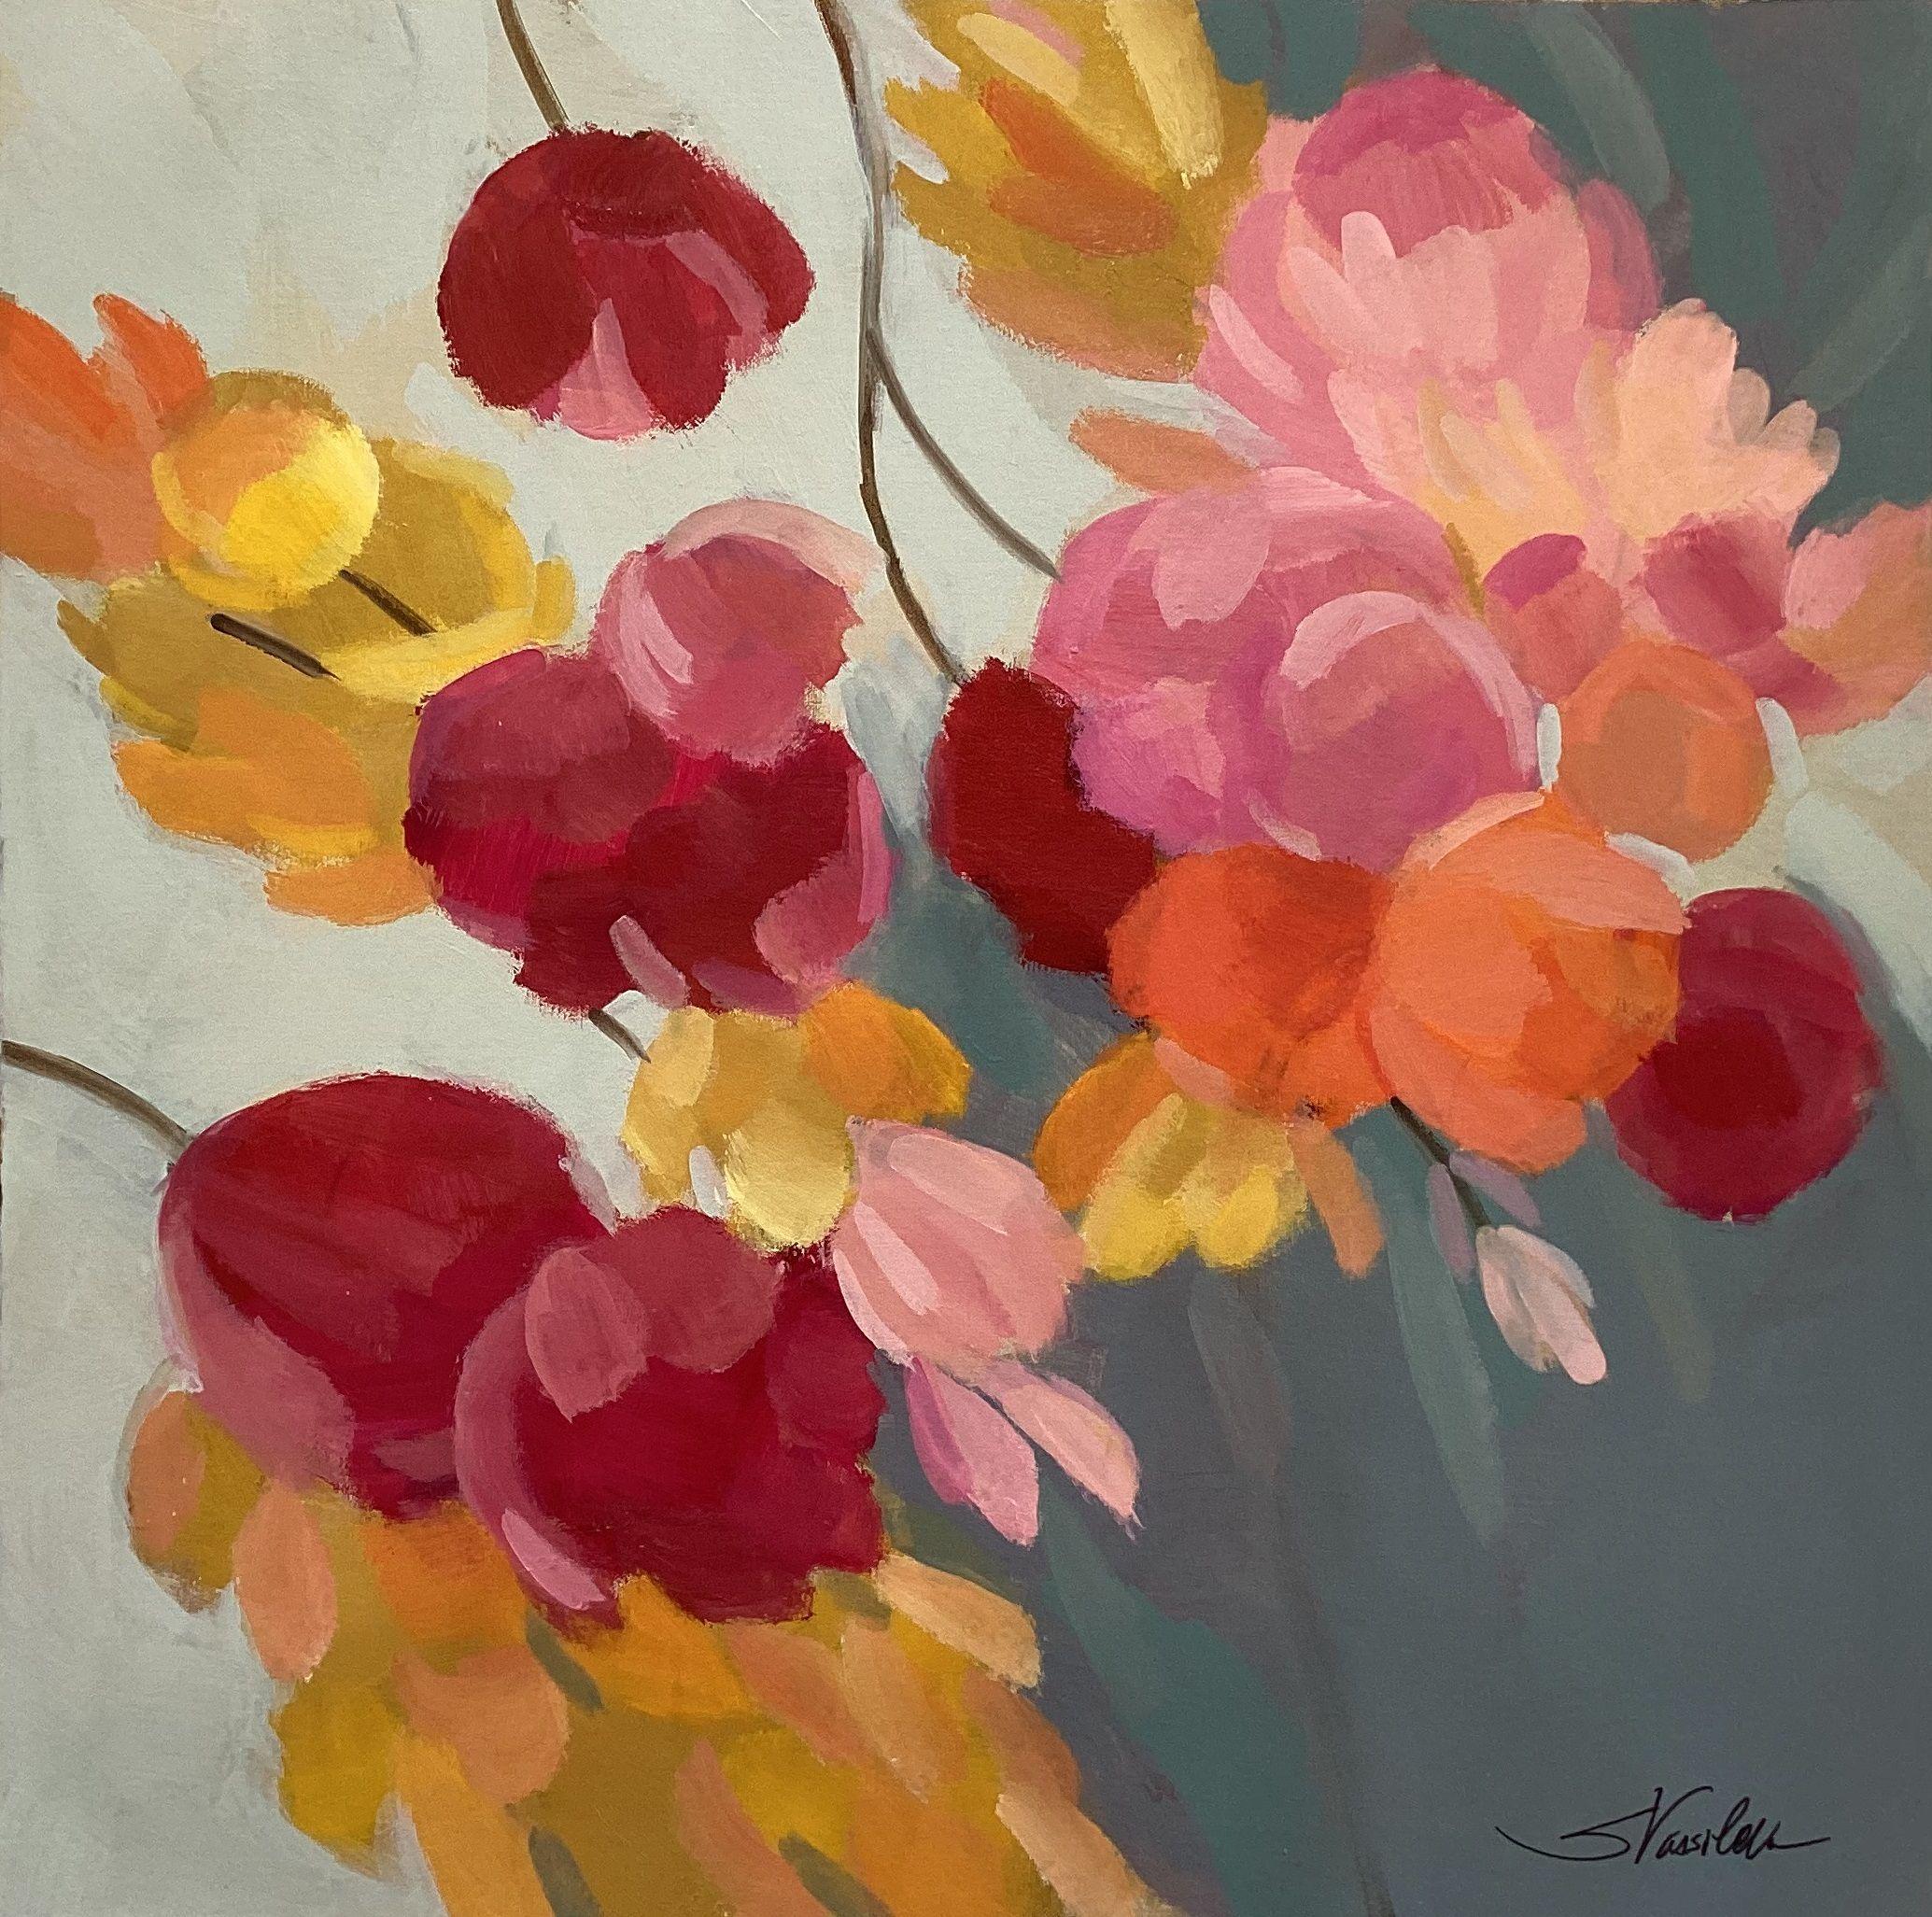 This square painting is part of a diptych, inspired by spring in the city and the Pantone Color of 2023 - Viva Magenta. The bold shapes of the blooming flowers are rendered with magenta, pink and yellow. The gray and white background add sharp